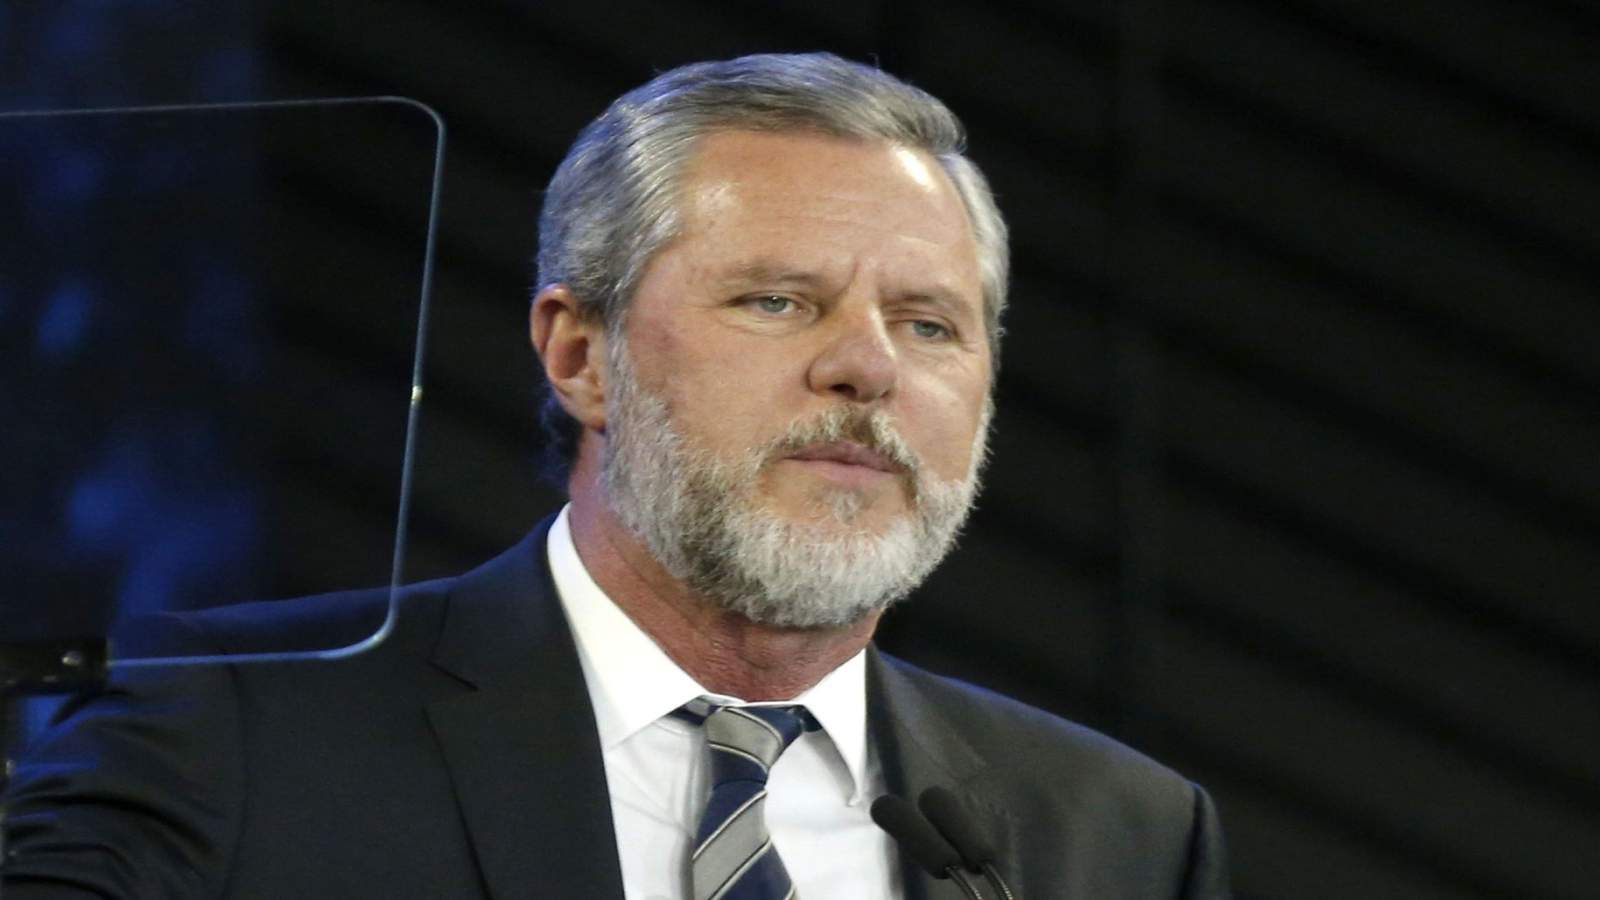 Jerry Falwell Jr. says blackmail led to recent controversial behavior